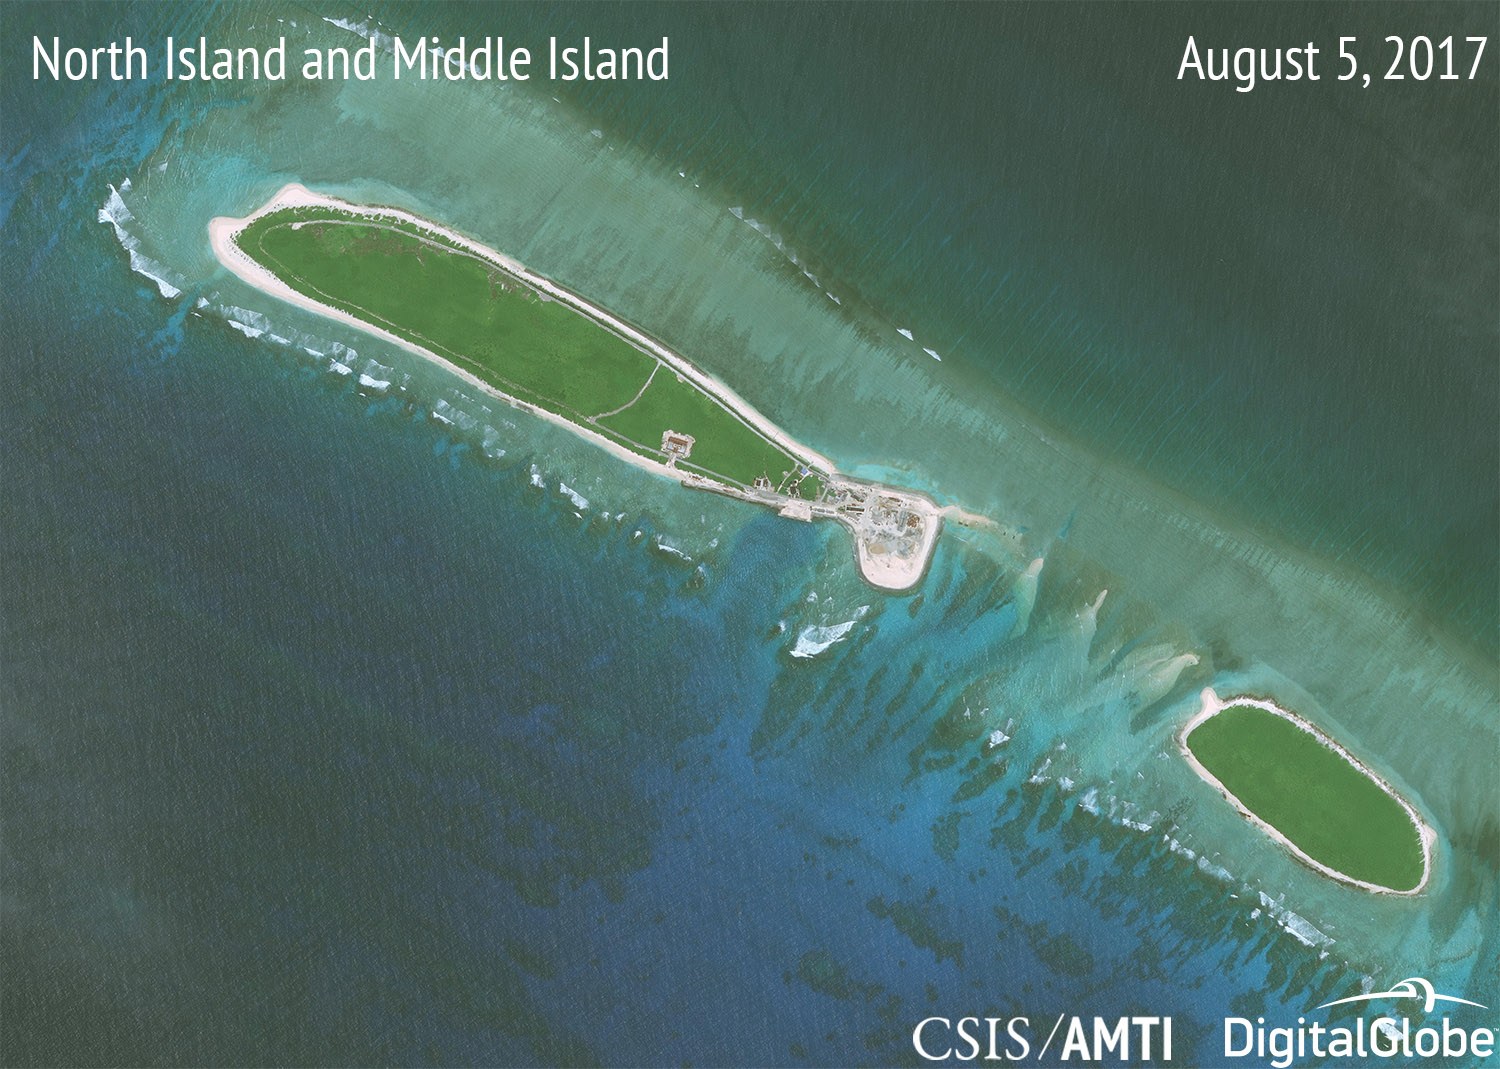 CHINA RECLAMATION. The Washington-based think tank CSIS releases photos that show China continued its reclamation activities in the South China Sea after 2015, contrary to claims by both Manila and Beijing. Photo courtesy of CSIS/AMTI and DigitalGlobe  